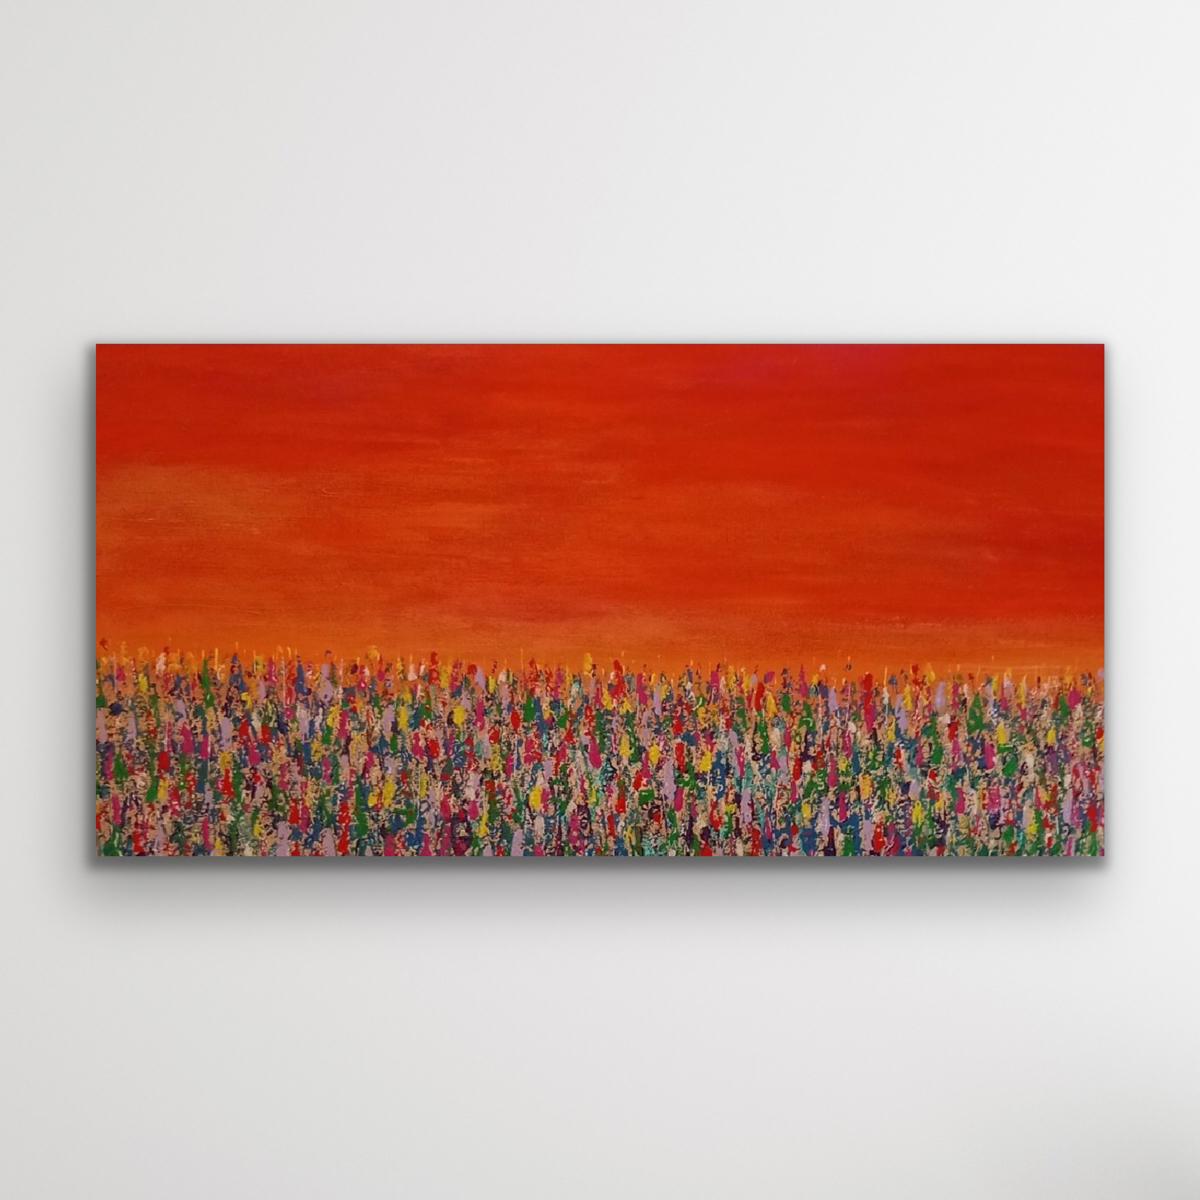 The colour choice for the sky emanates a deep warmth - reds and yellows and oranges and pinks all blended together. The bright colours of the flowers give a pop to the painting giving out happy vibes.

Discover more original artwork by Pixie